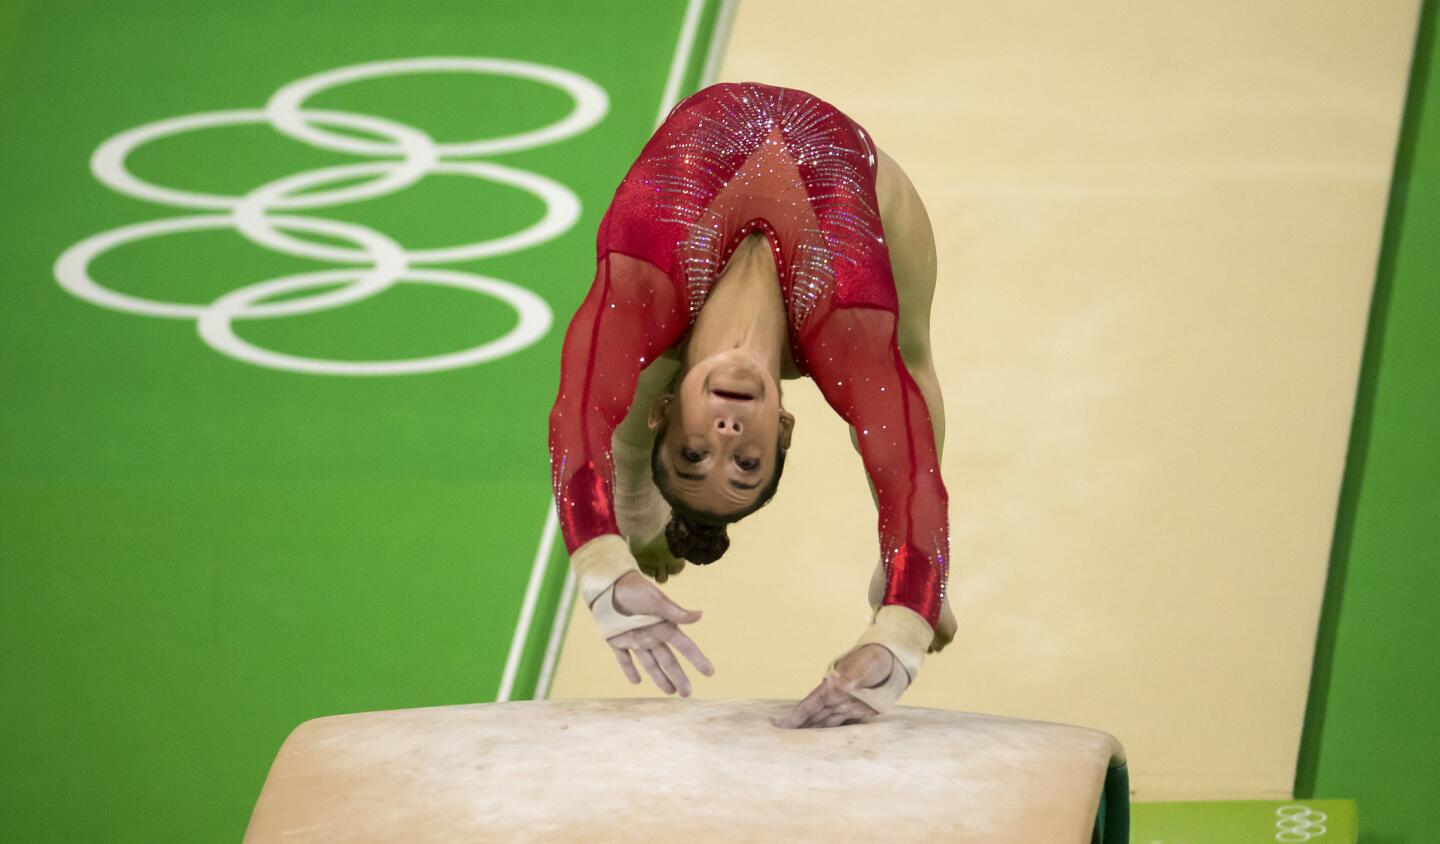 Vault competition